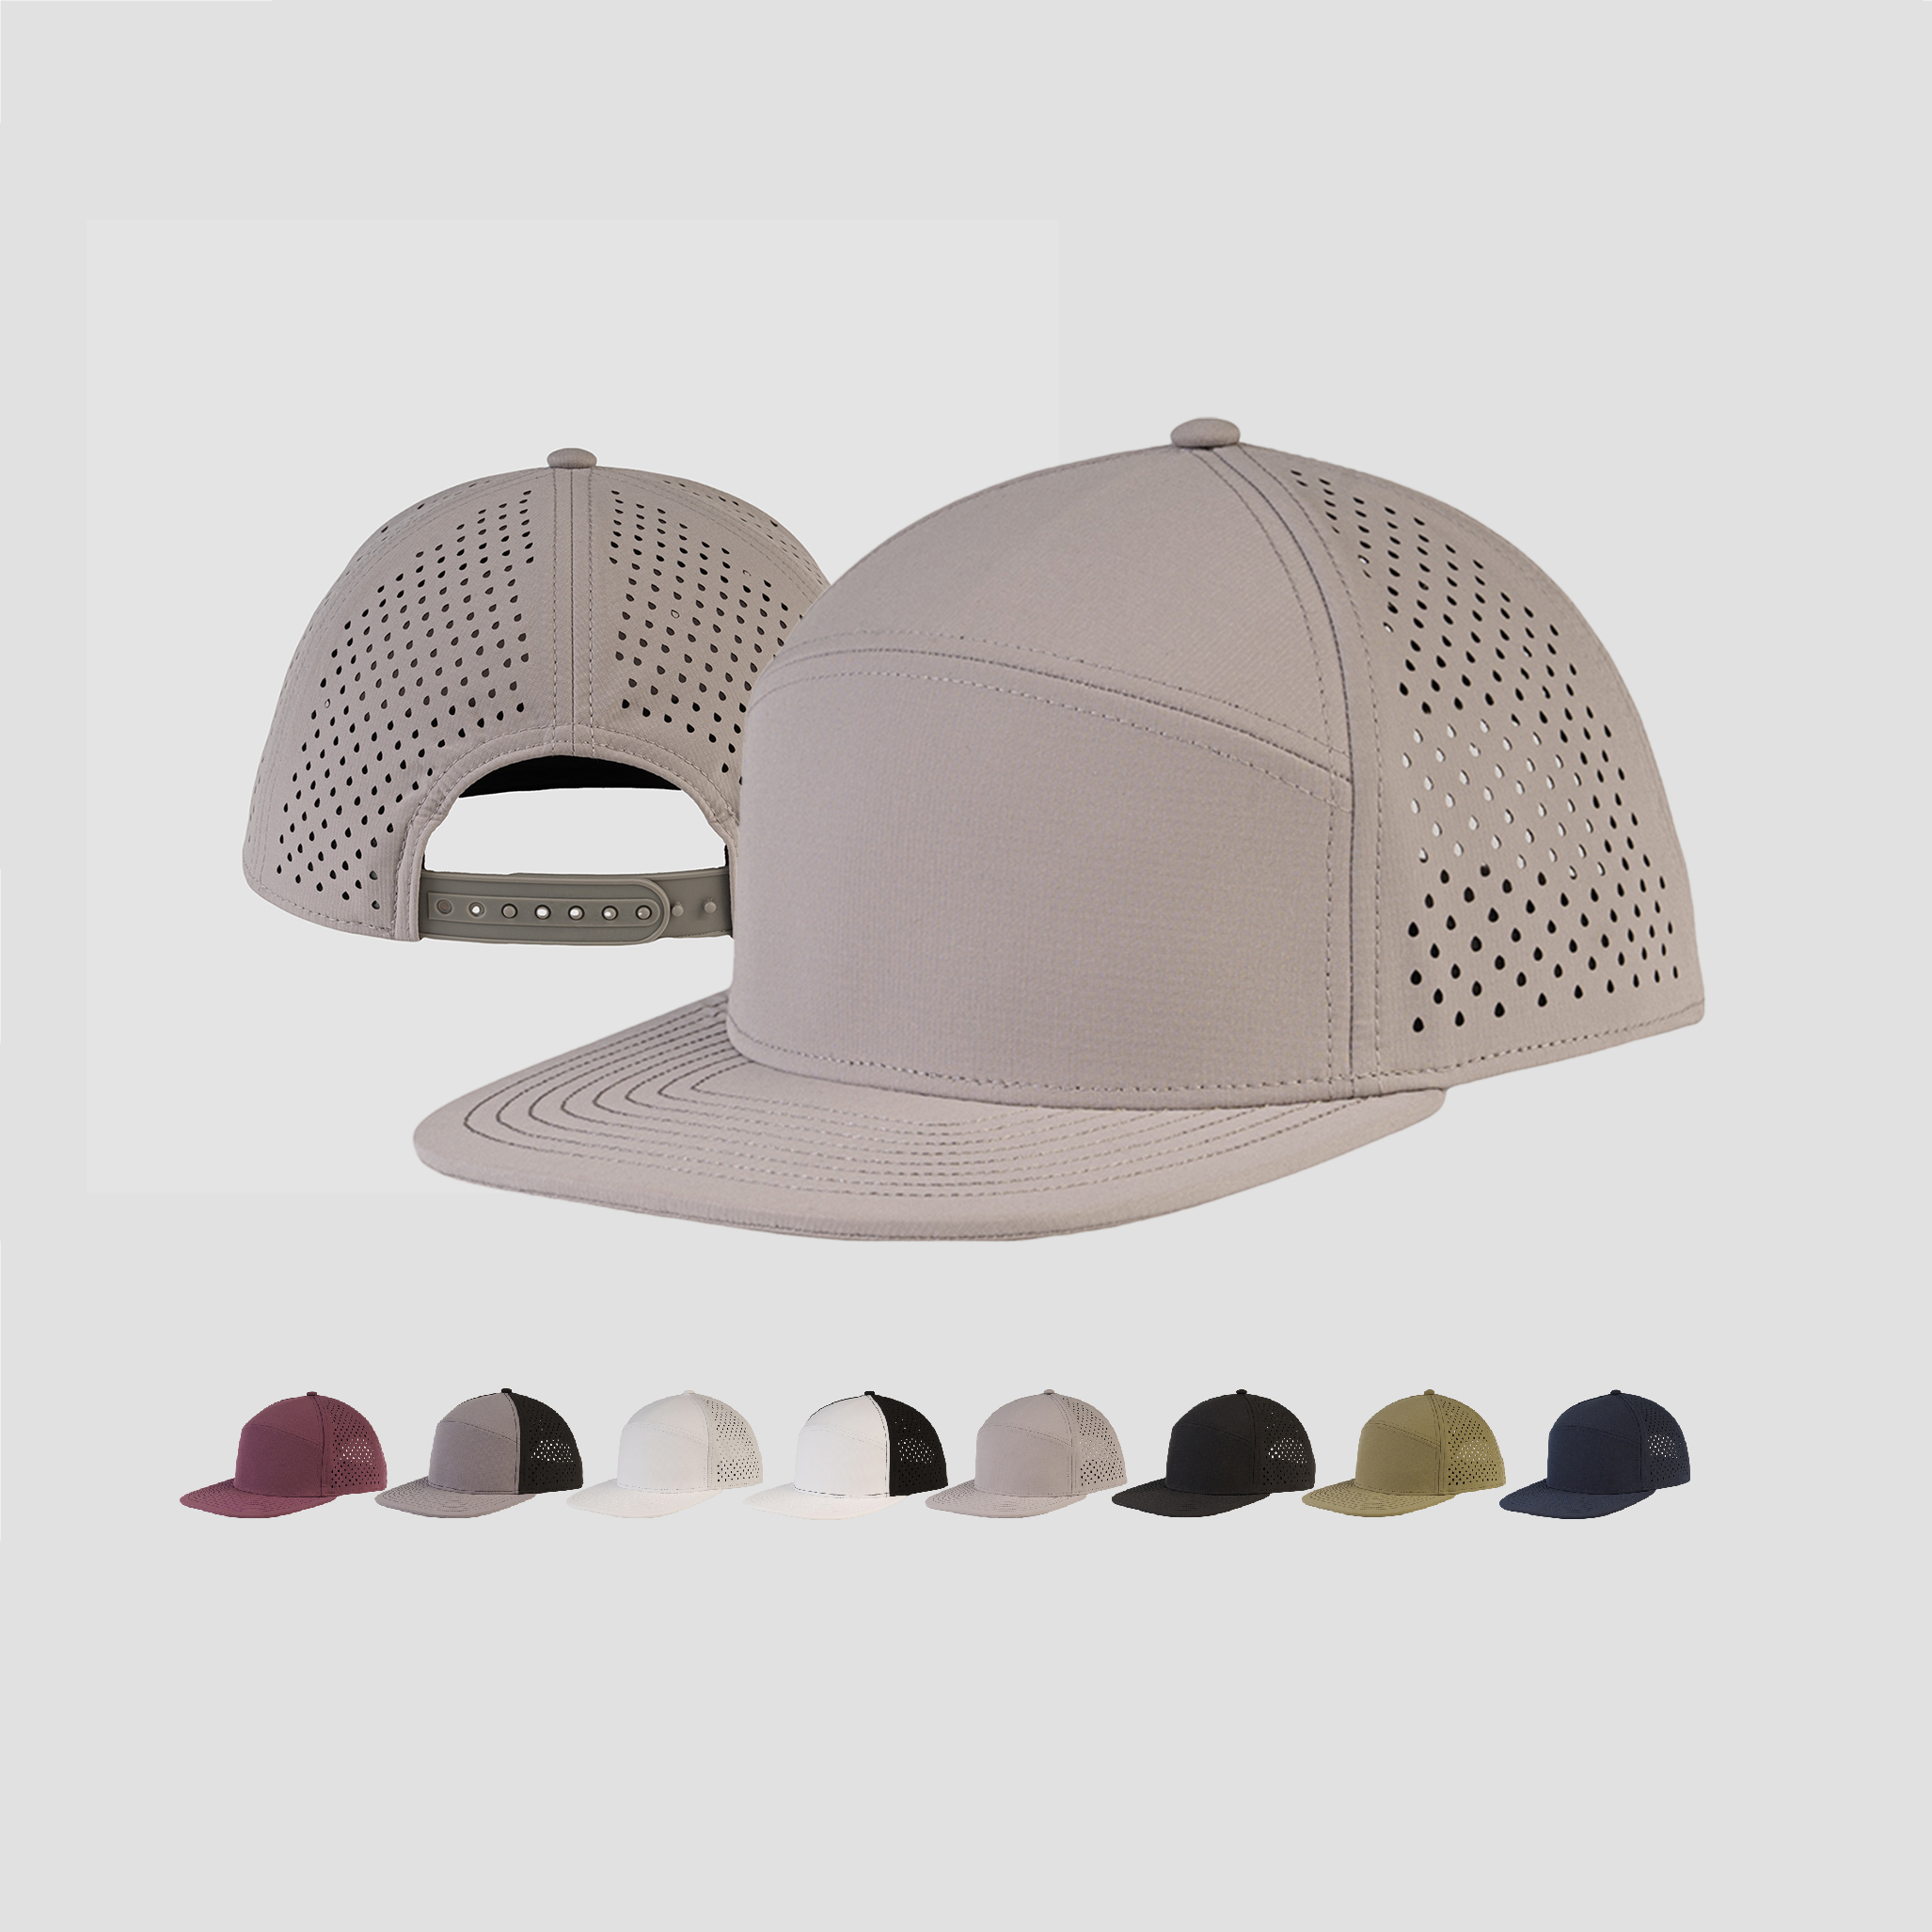 Wholesale Blank & Custom Hats Supplier - Foremost Hat